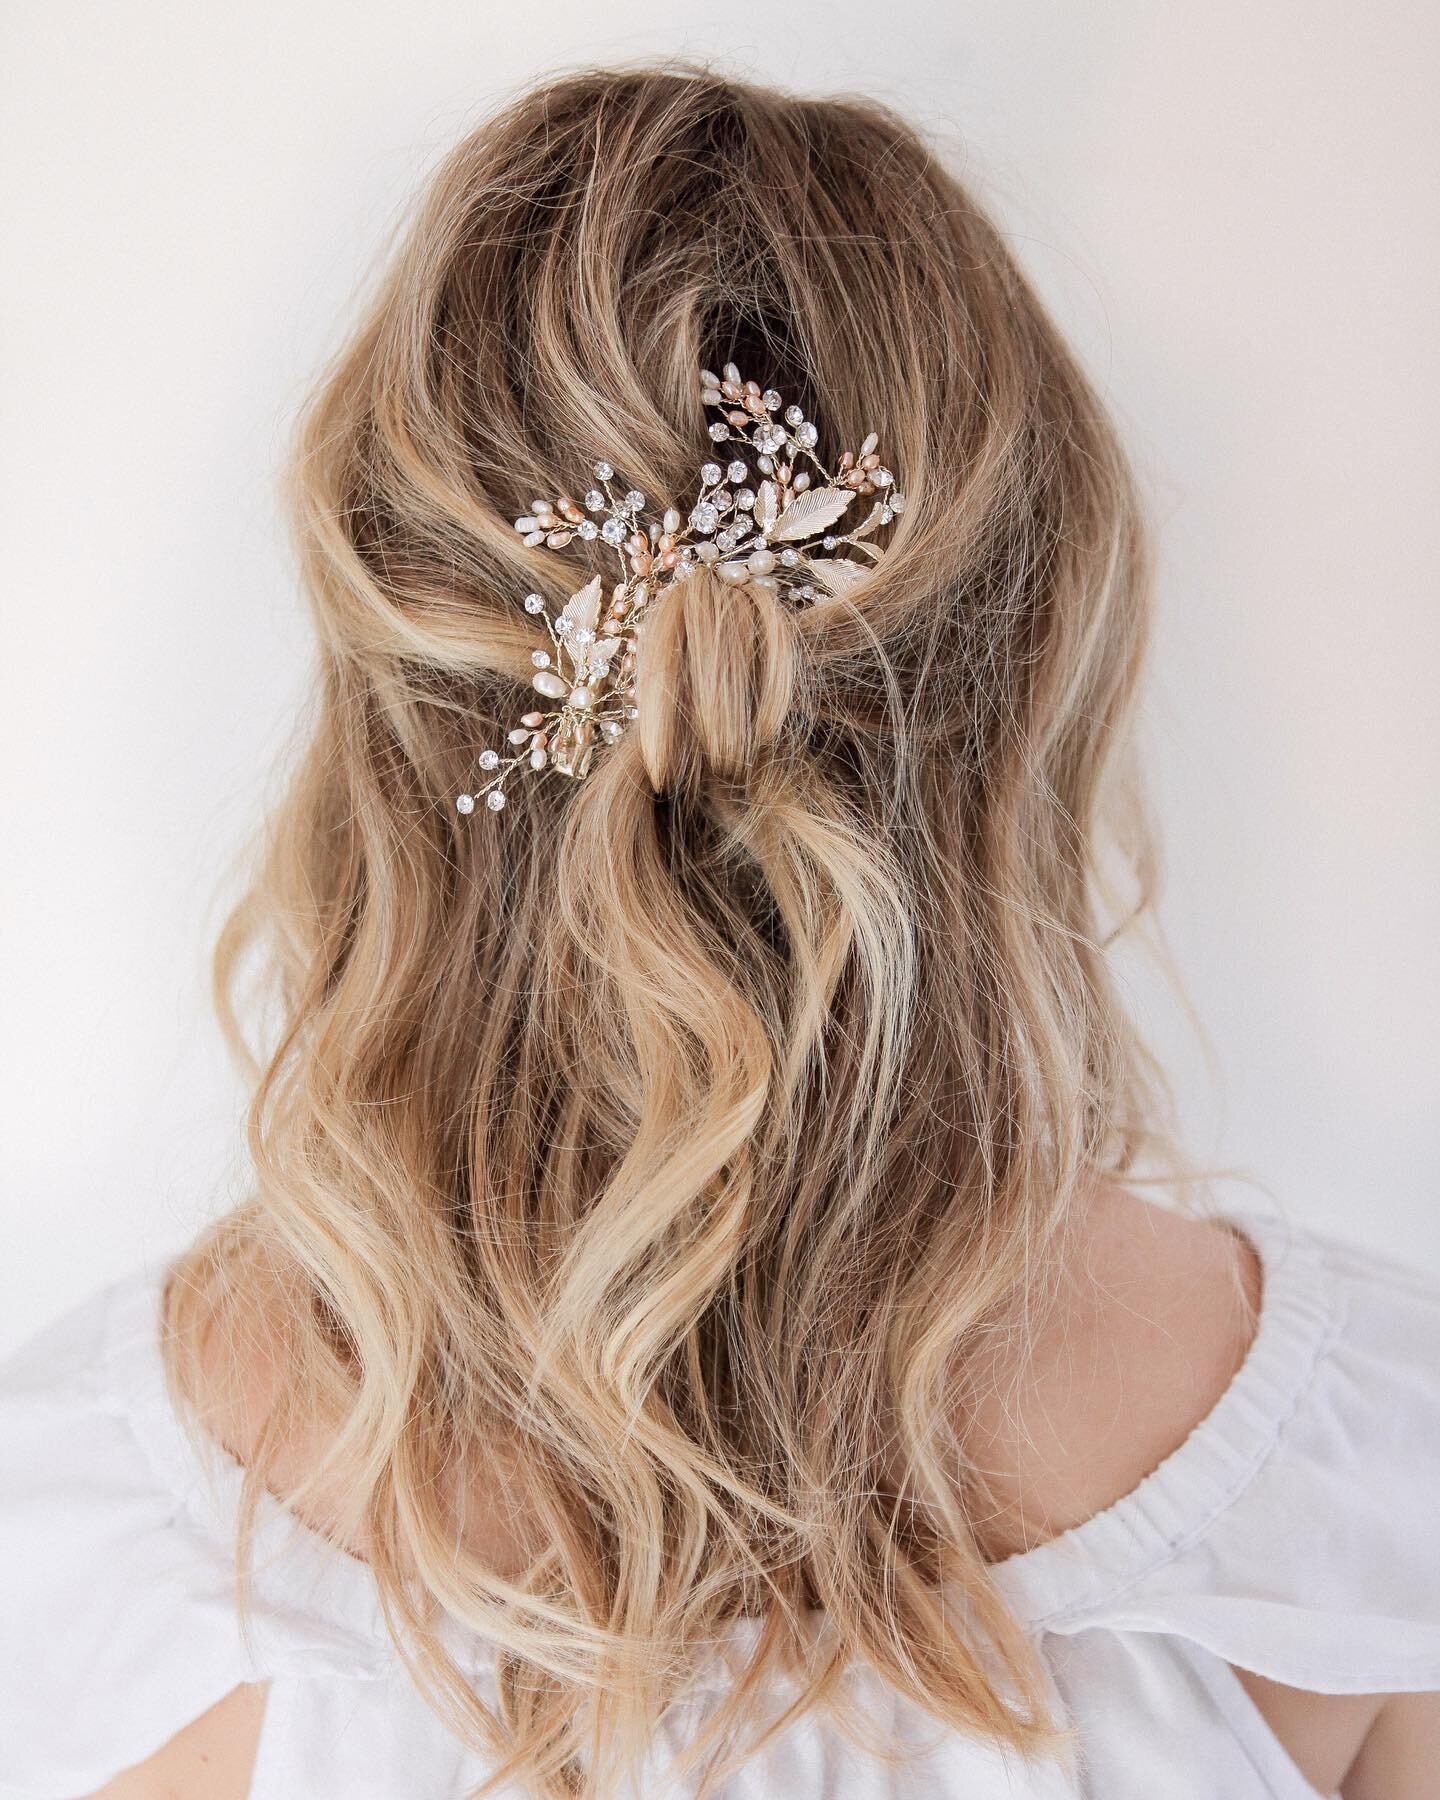 Soft and swept up, with a touch of detail. From our last collab with BHLDN. ✨ 
Hair: @mollystilley 
Photo: @joannaballentine 
Clip: @bhldn 
#beautifullybethrothed